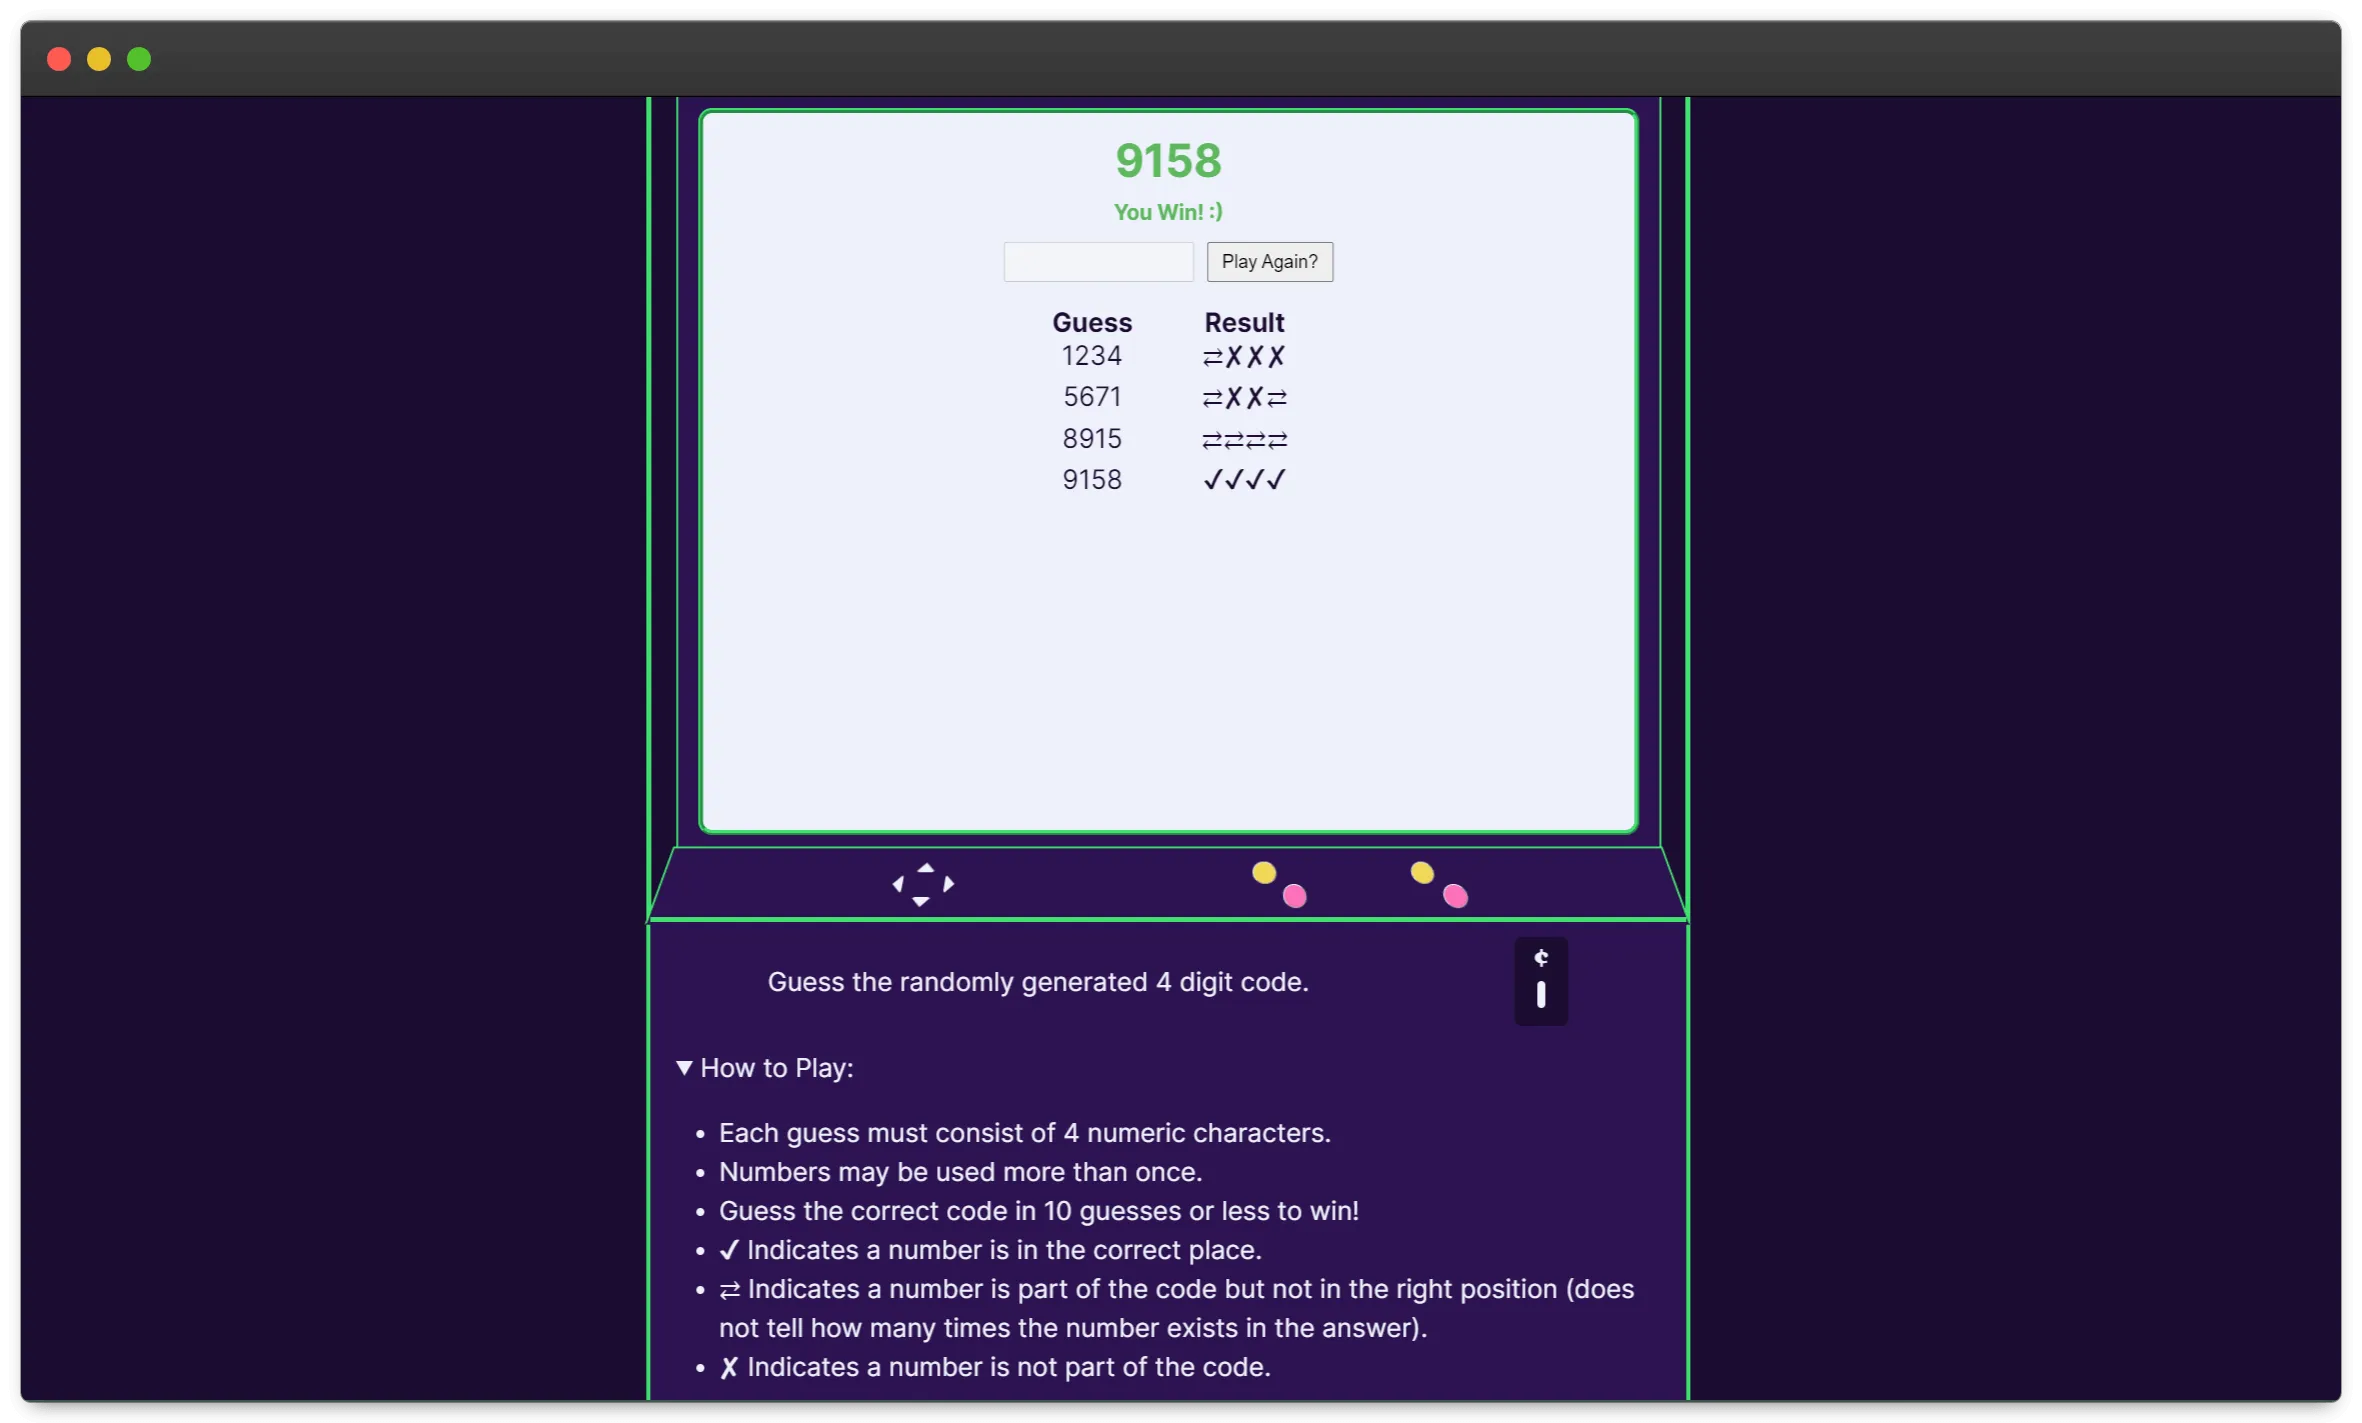 A purple background with an arcade machine in the center, outlined in neon green. The machine heading says the game is called Code Breaker. On the white screen, the text 0205 You Win! is written in green. Below this is an empty input and a button asking the user to play again. Under this a list is seen of the users previous guesses and if the numbers were in the right order or not.